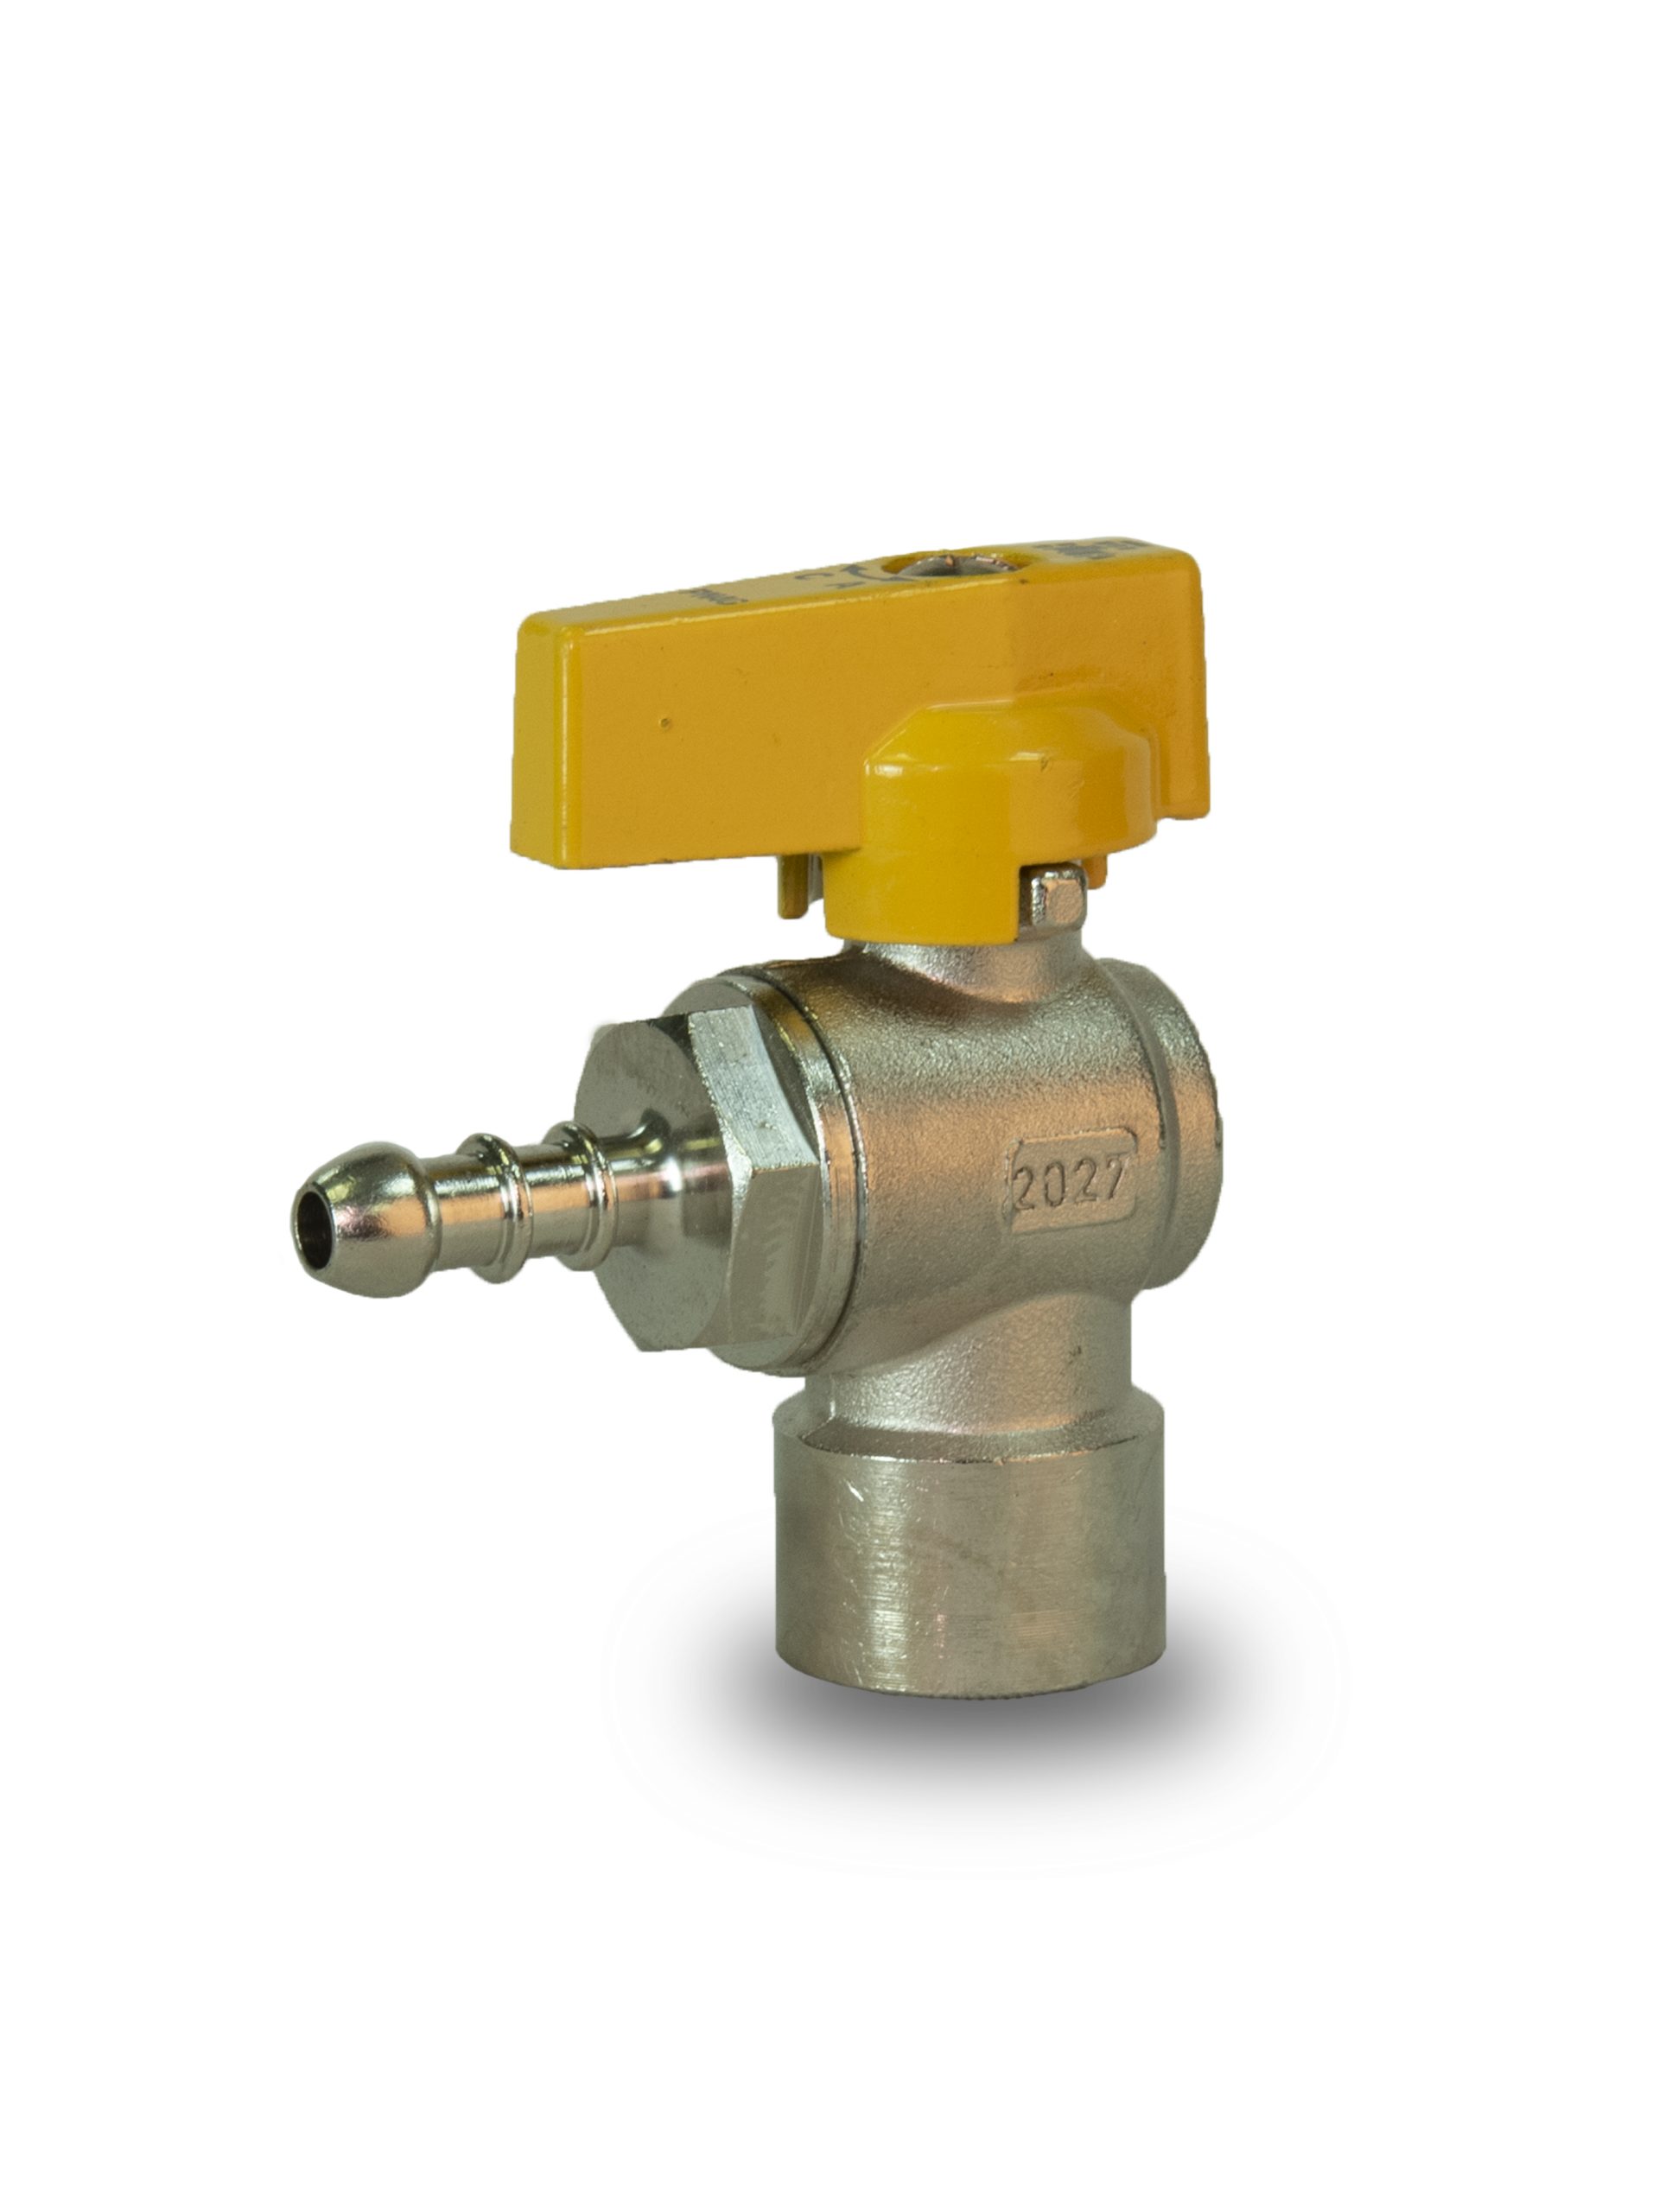 GAS BALL VALVE ITALY 1/2 Inches FEMALE X 10H